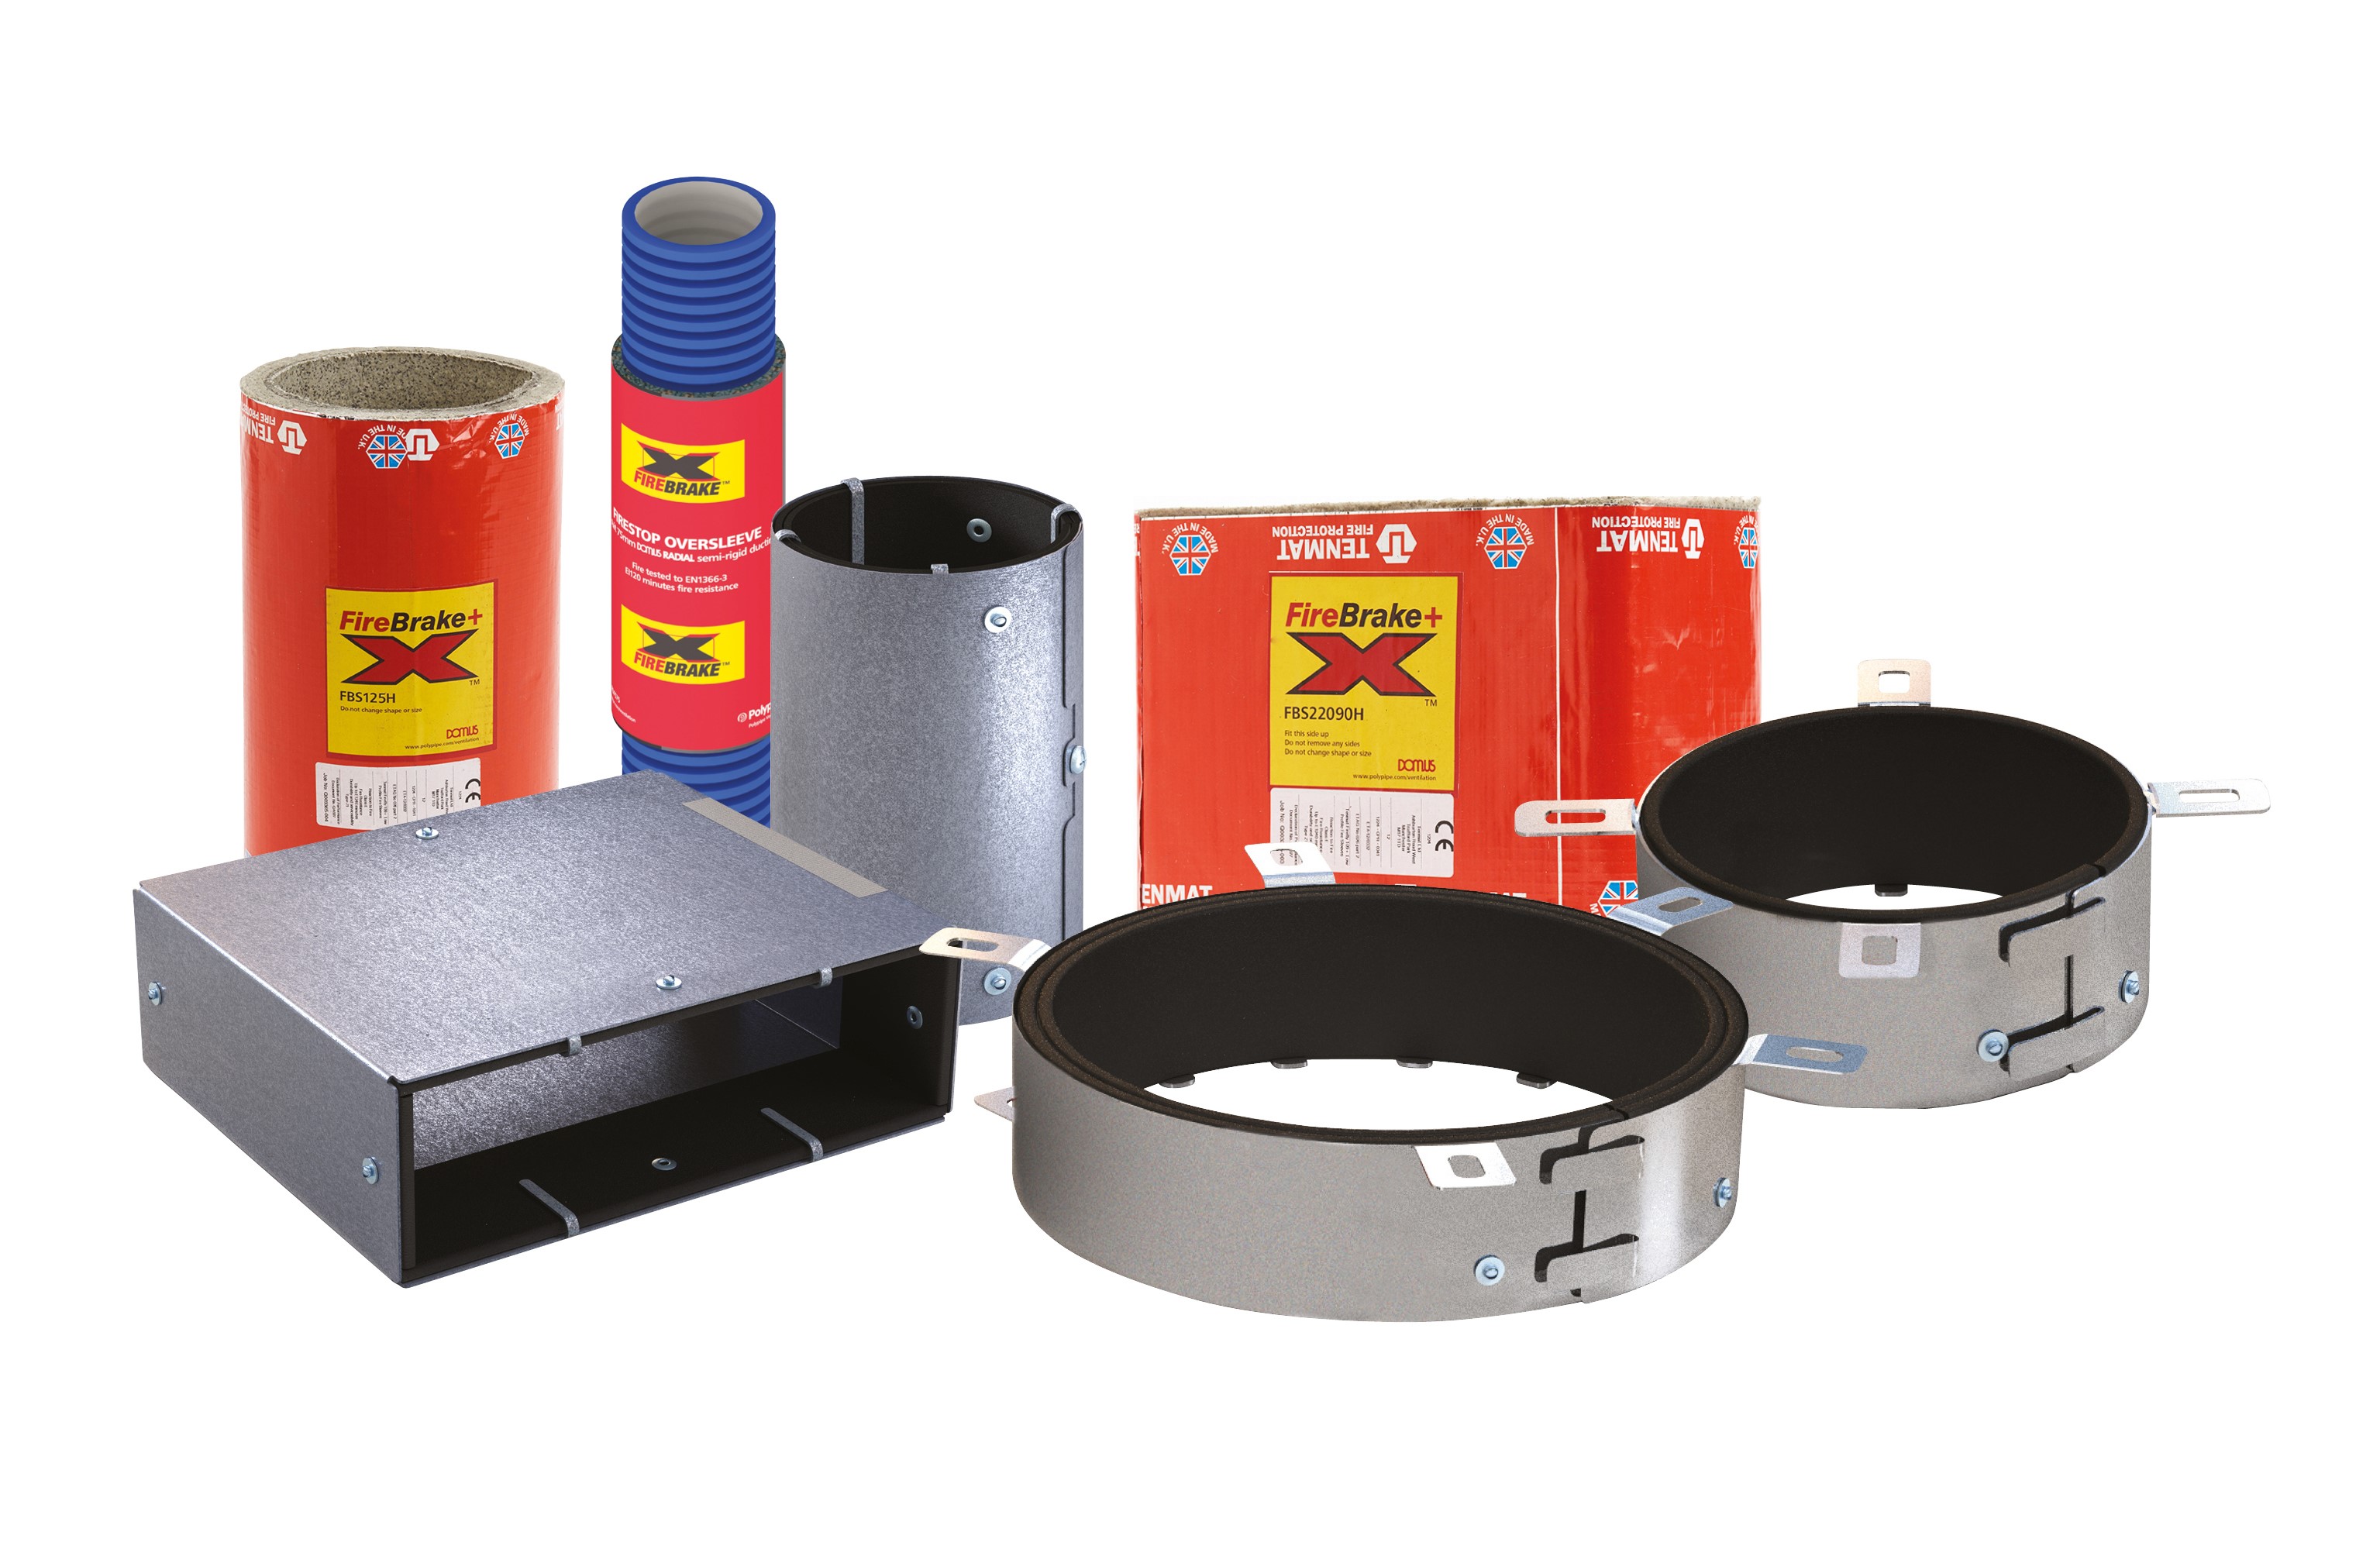 Complete fire ducting protection range